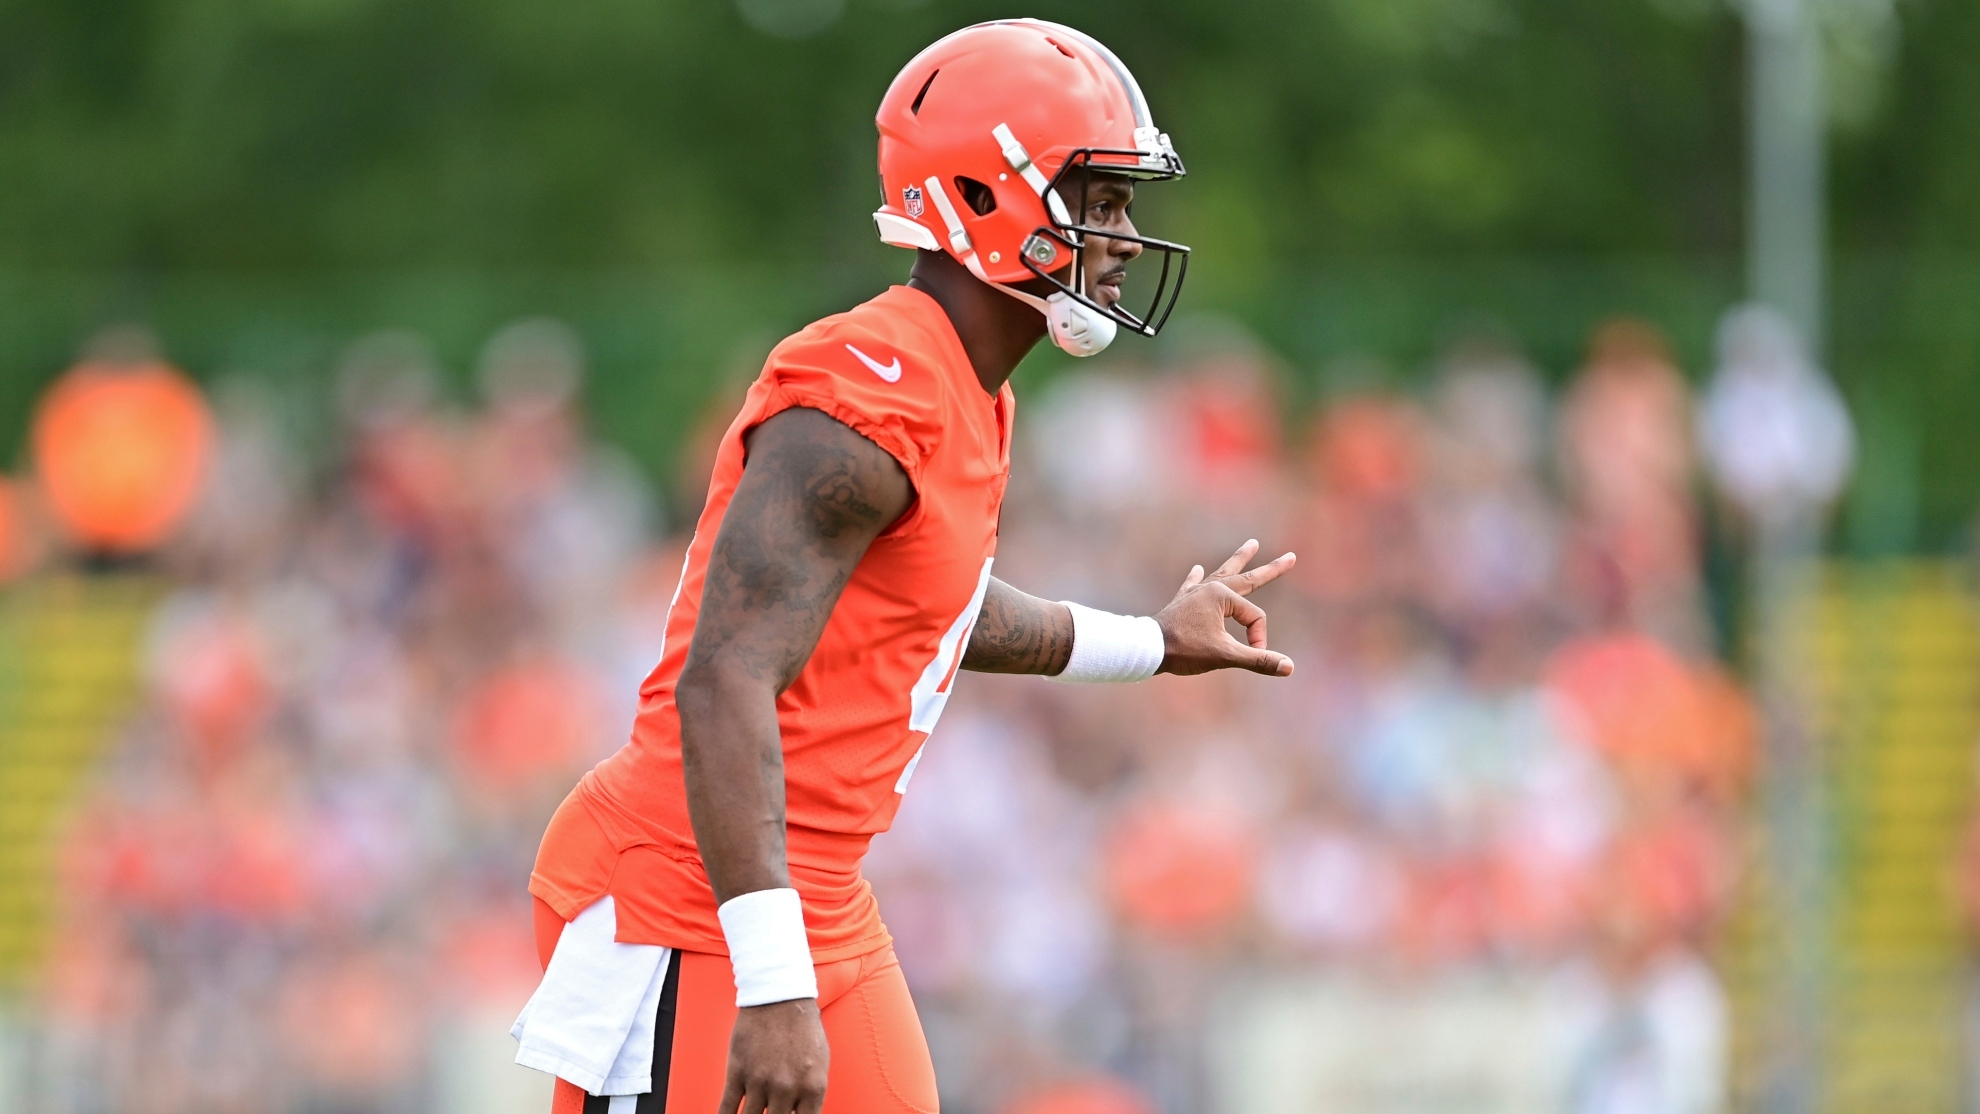 Deshaun Watson during pre-season camp with the Cleveland Browns